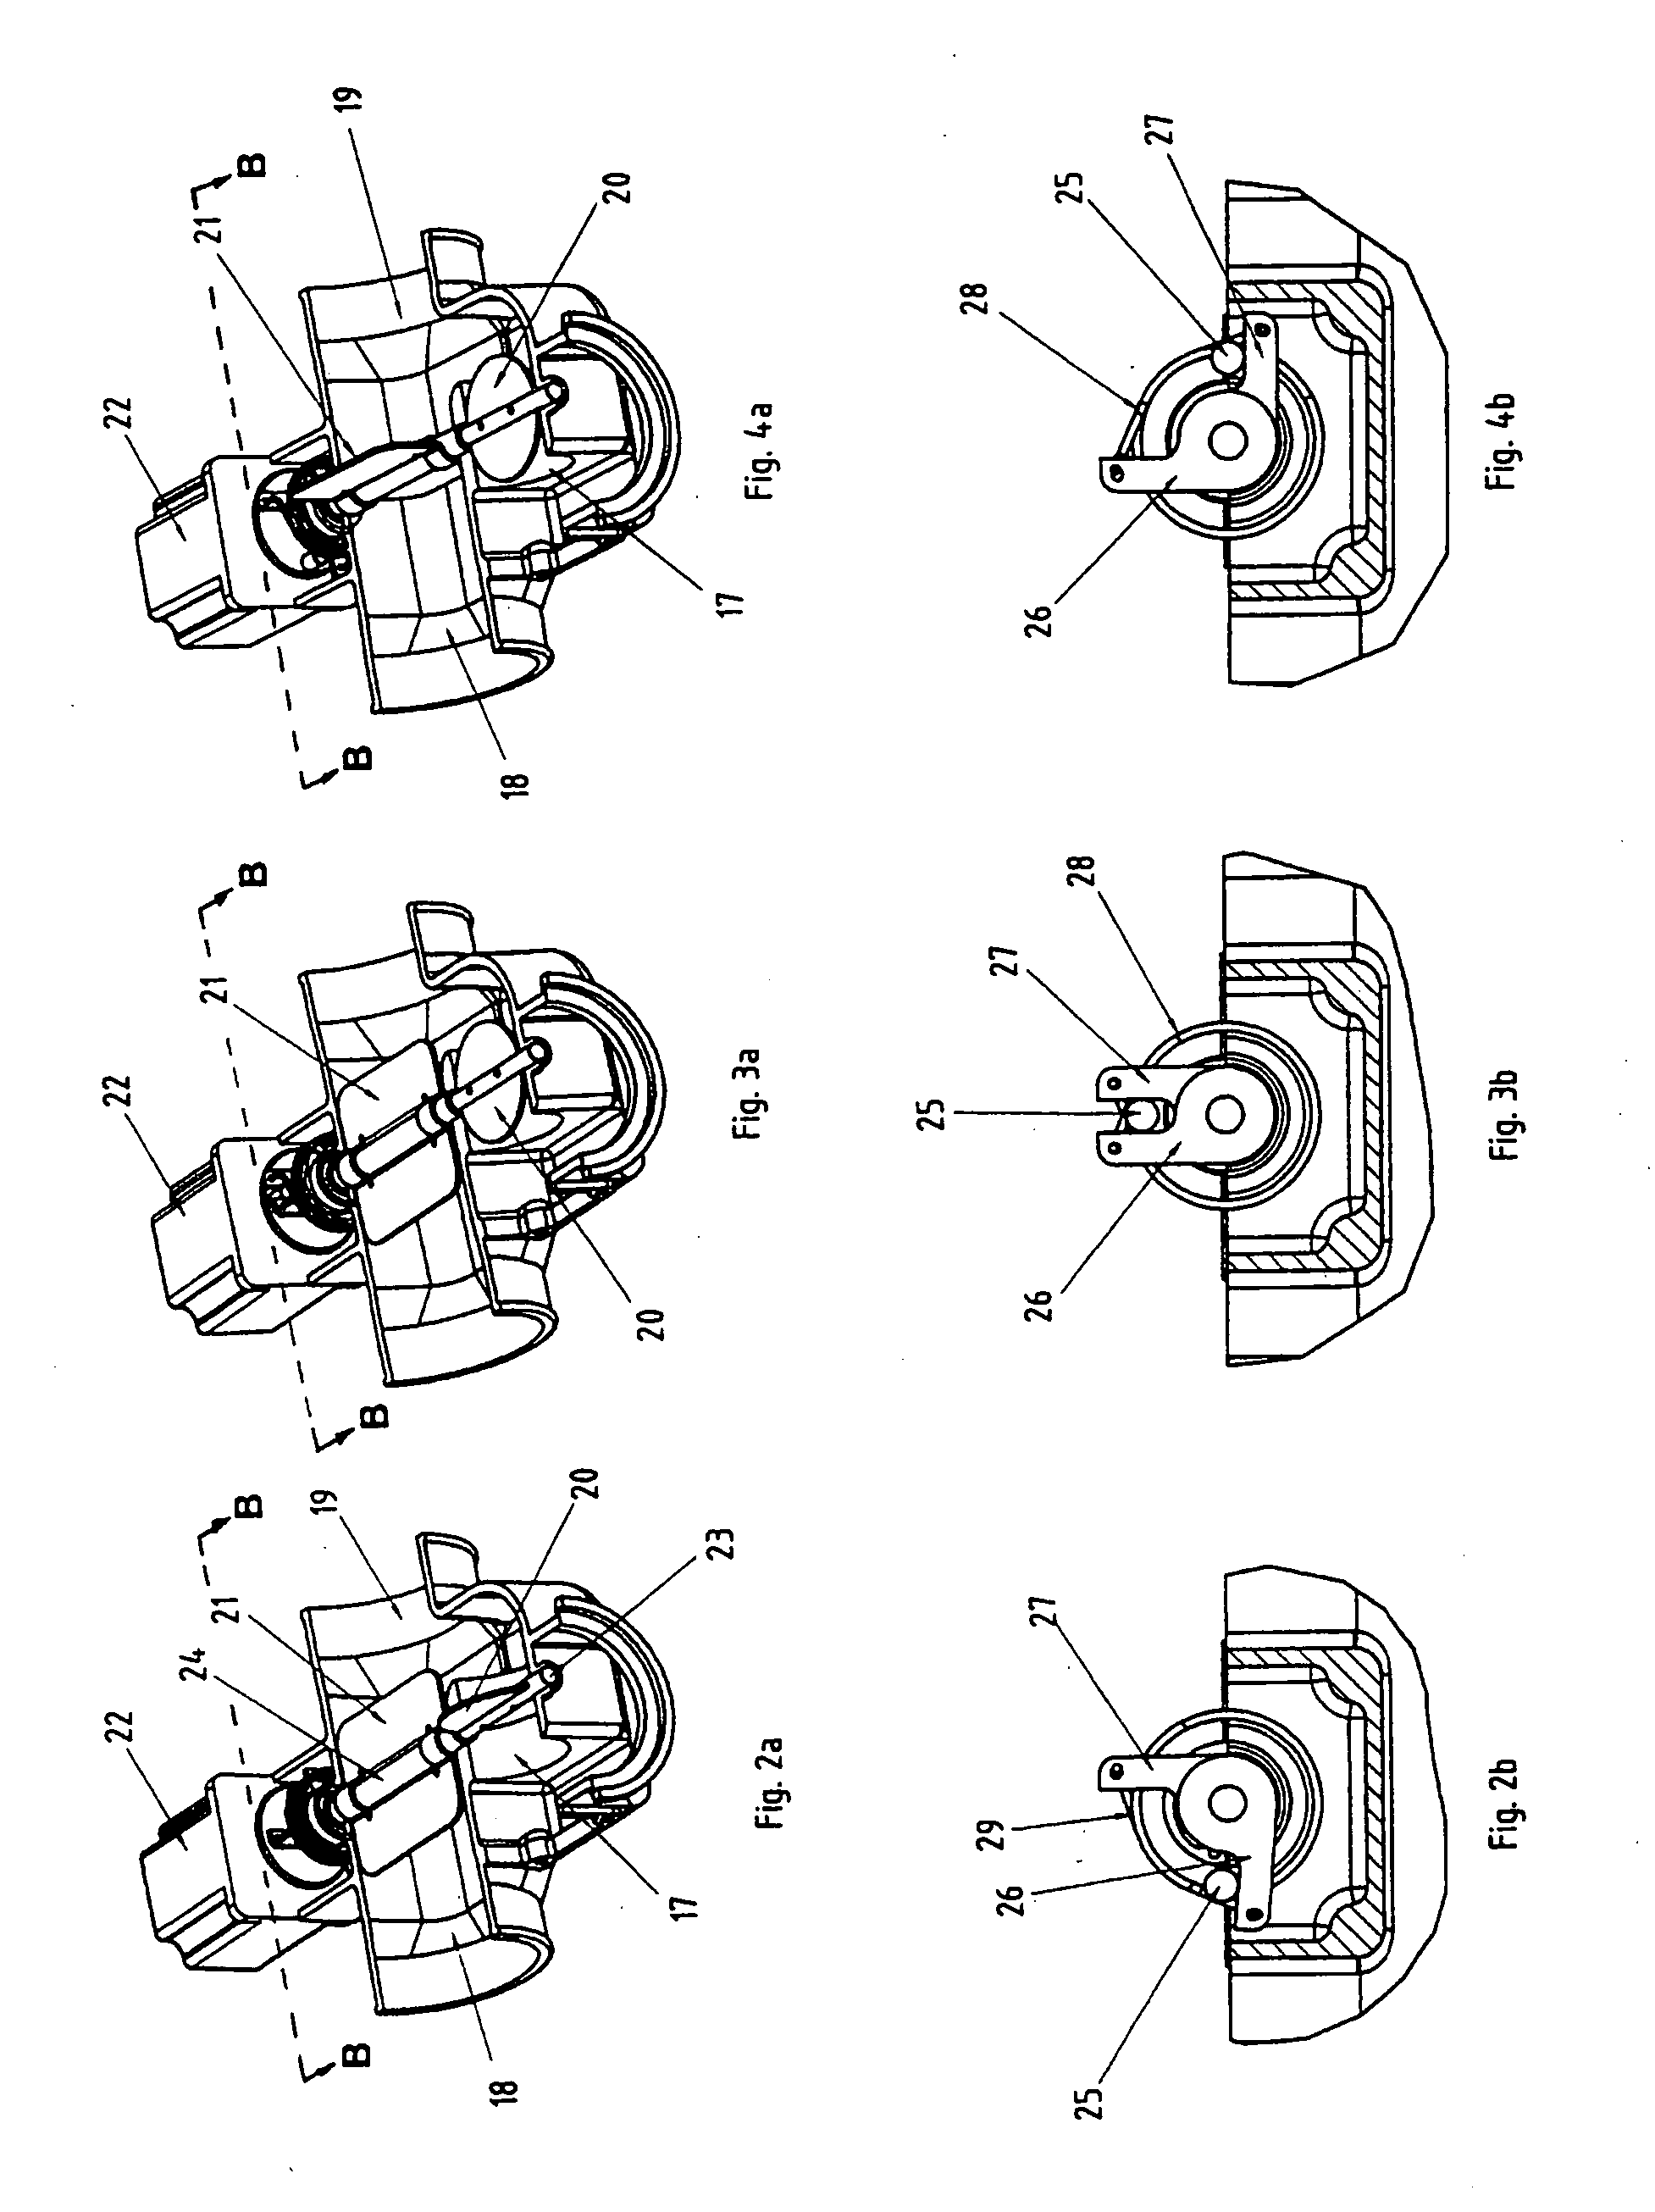 Method and device for an EGR-system and a valve as well as a regulation method and device